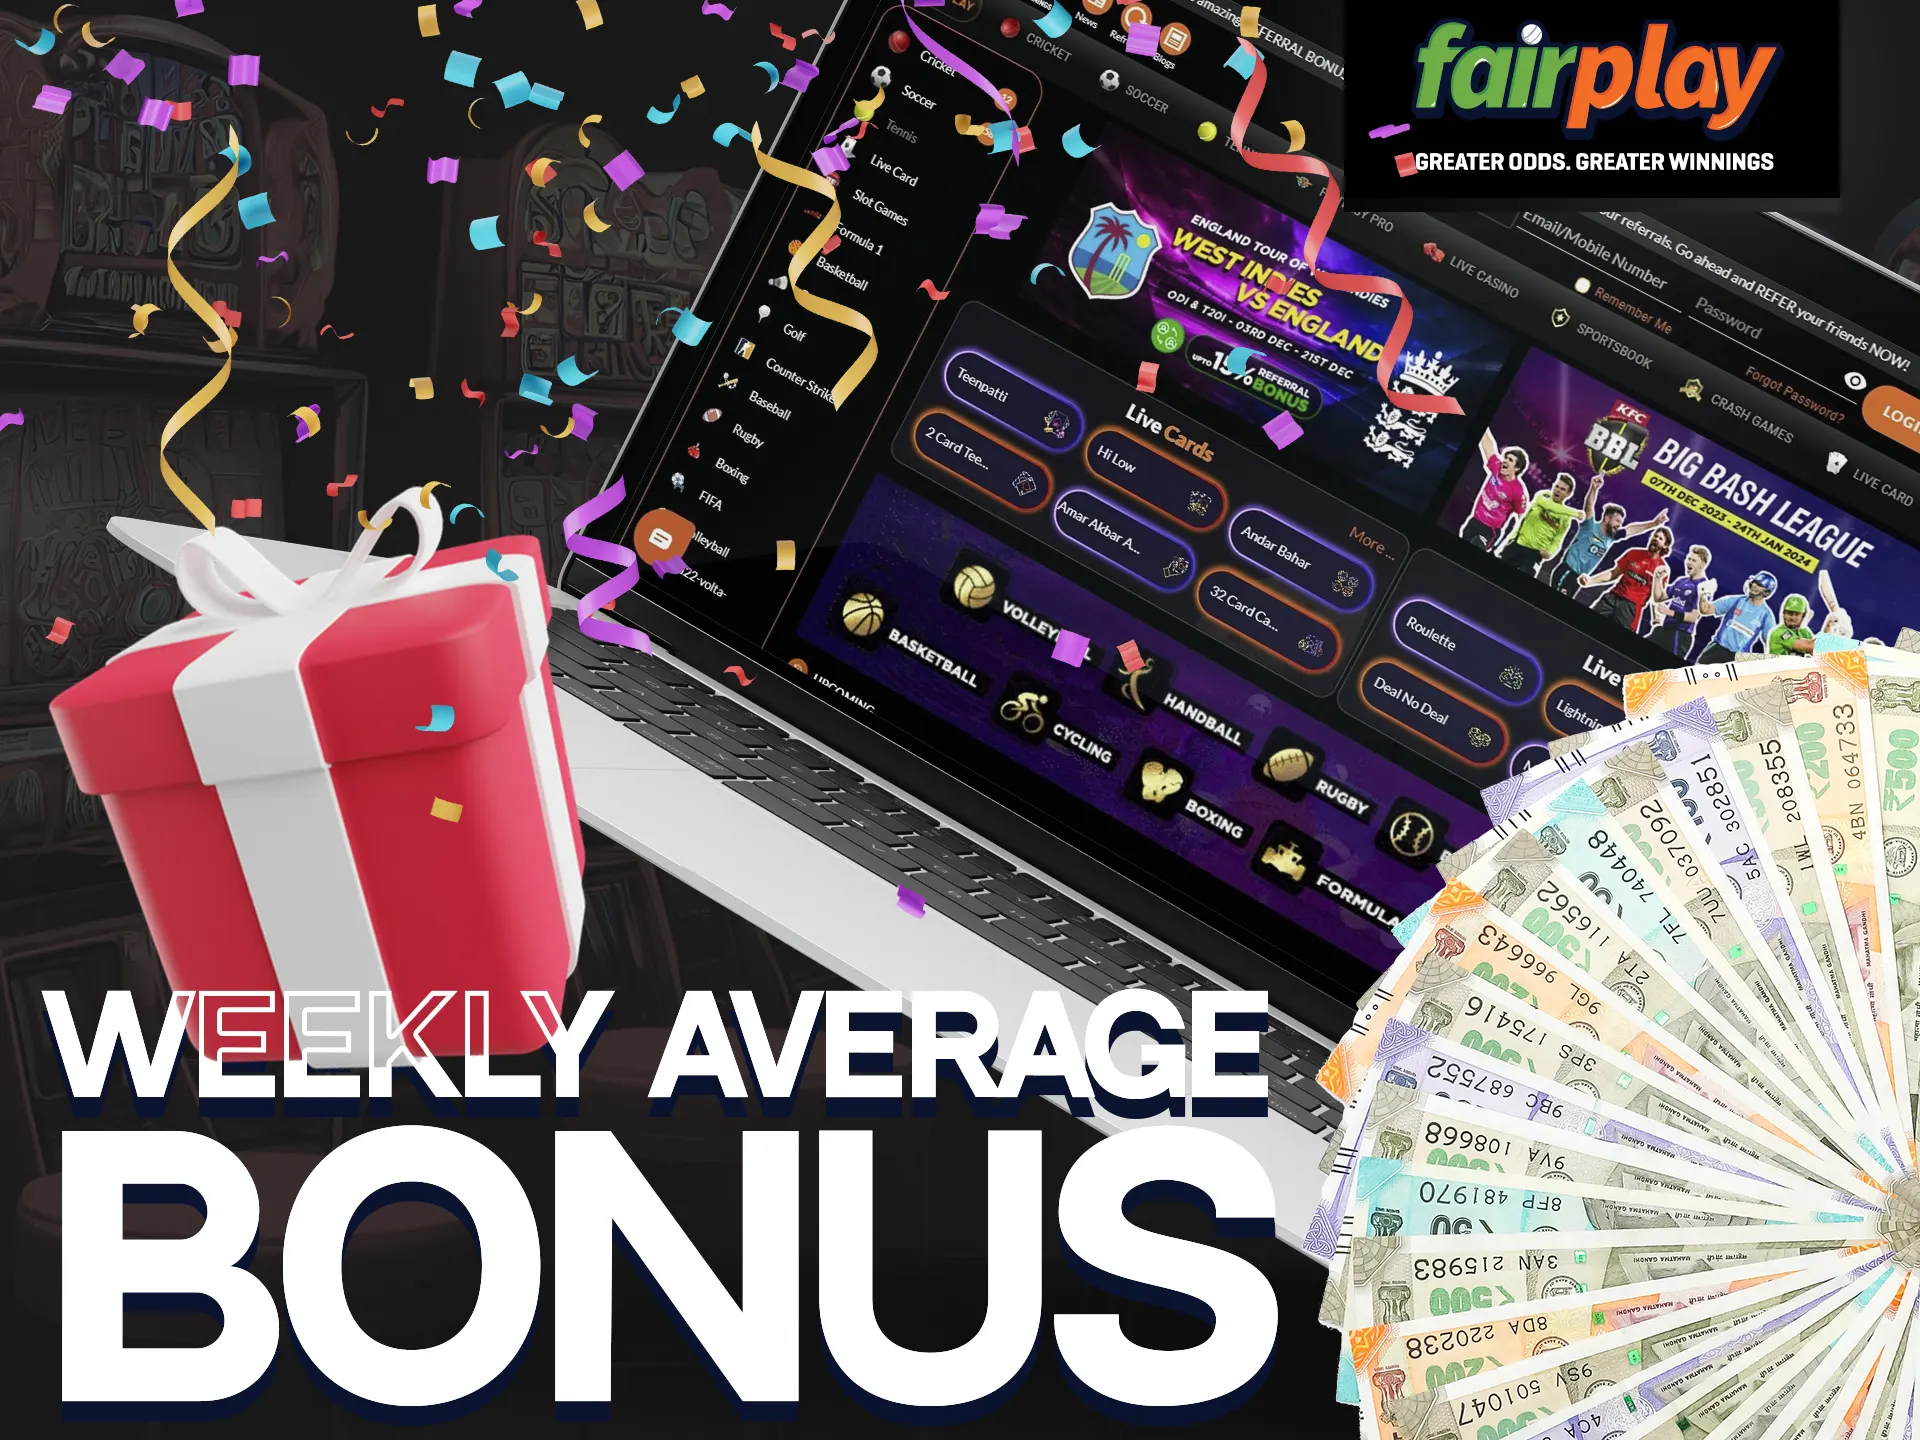 Get back the 3 percents of your deposit with weekly average bonus at Fairplay.